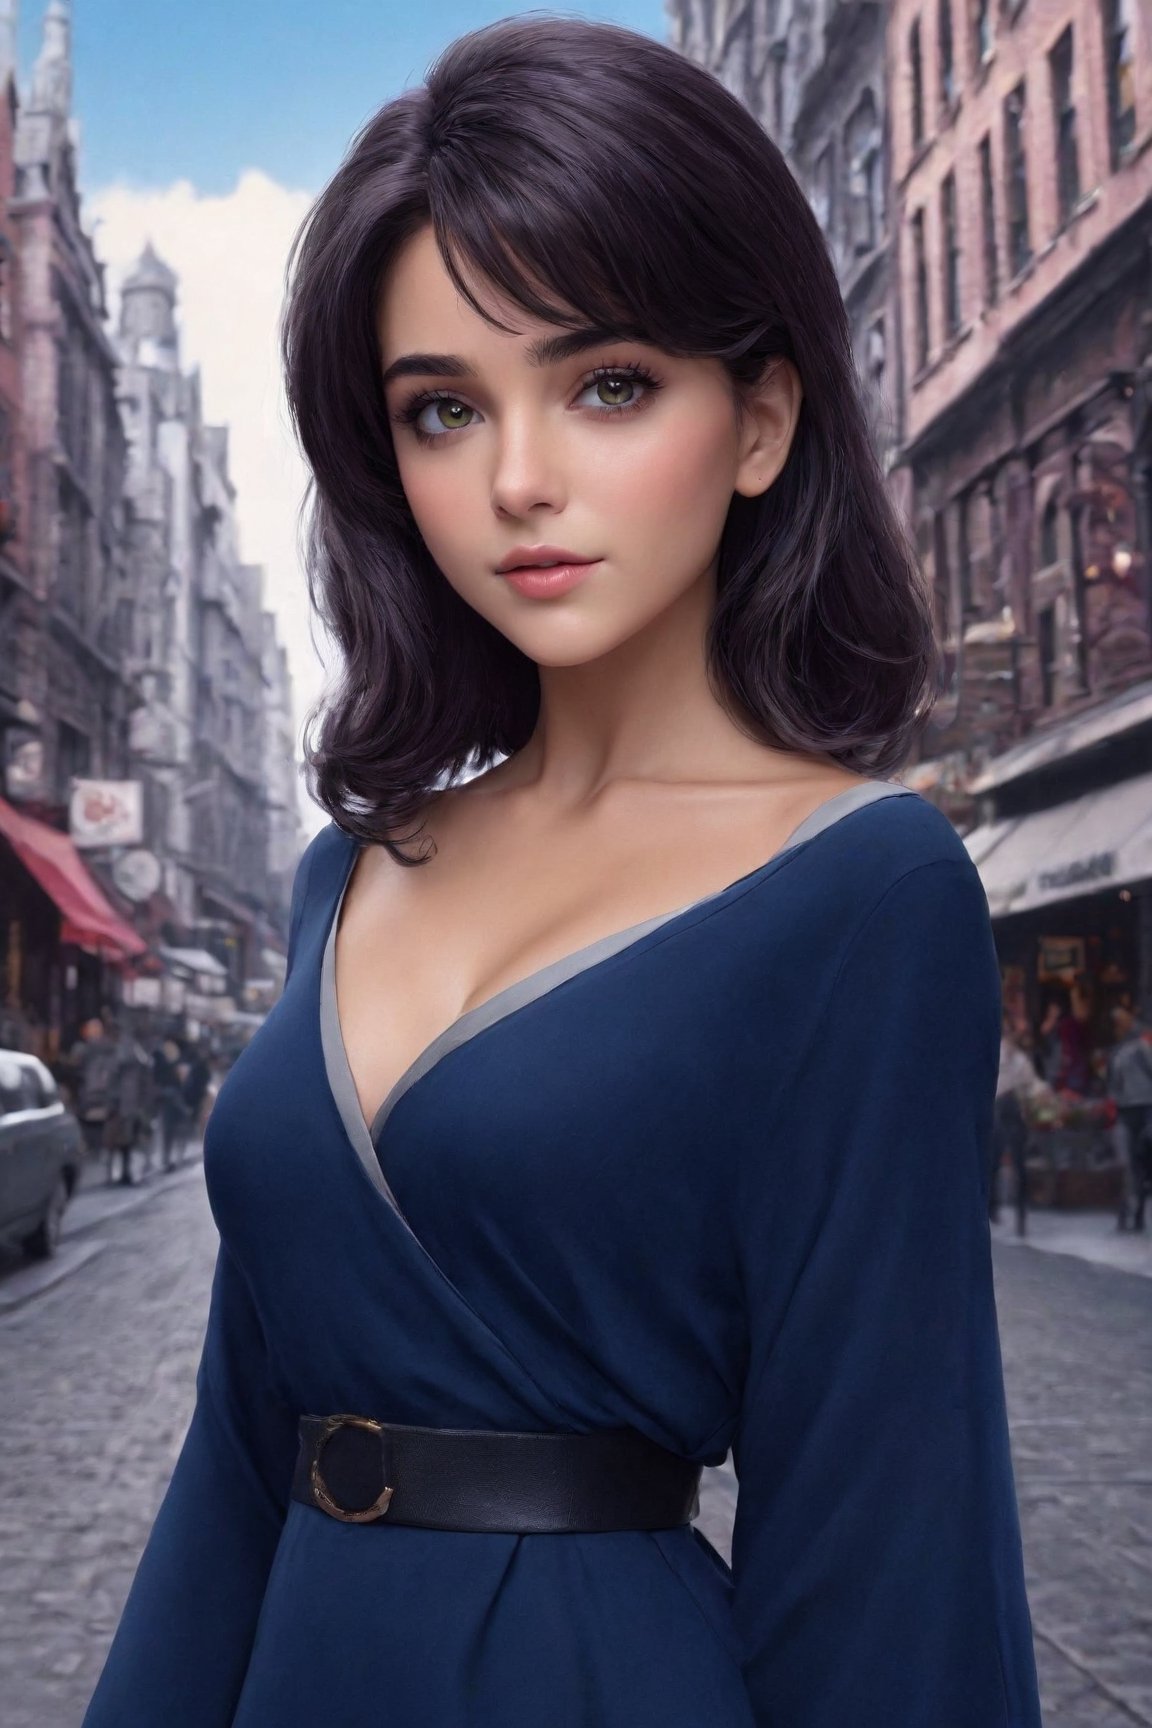 ((Ultra-Detailed)) portrait of a girl wearing a witchhat,standing in a busy shoppping street,1 girl,20yo,detailed exquisite face,soft shiny skin,playful smirks,detailed pretty eyes,glossy lips 
BREAK
(backdrop:ultra-detailed shopping street in a big city,many people,cars,blue sky),(girl focus),(fullbody shot)
BREAK 
(sharp focus,high contrast),studio photo,trending on artstation,ultra-realistic,Super-detailed,intricate details,HDR,8K,chiaroscuro lighting,vibrant colors,by Karol Bak,Gustav Klimt and Hayao Miyazaki,
inkycapwitchyhat,real_booster,photo_b00ster,(InkyCapWitchyHat),w1nter res0rt,art_booster,ani_booster